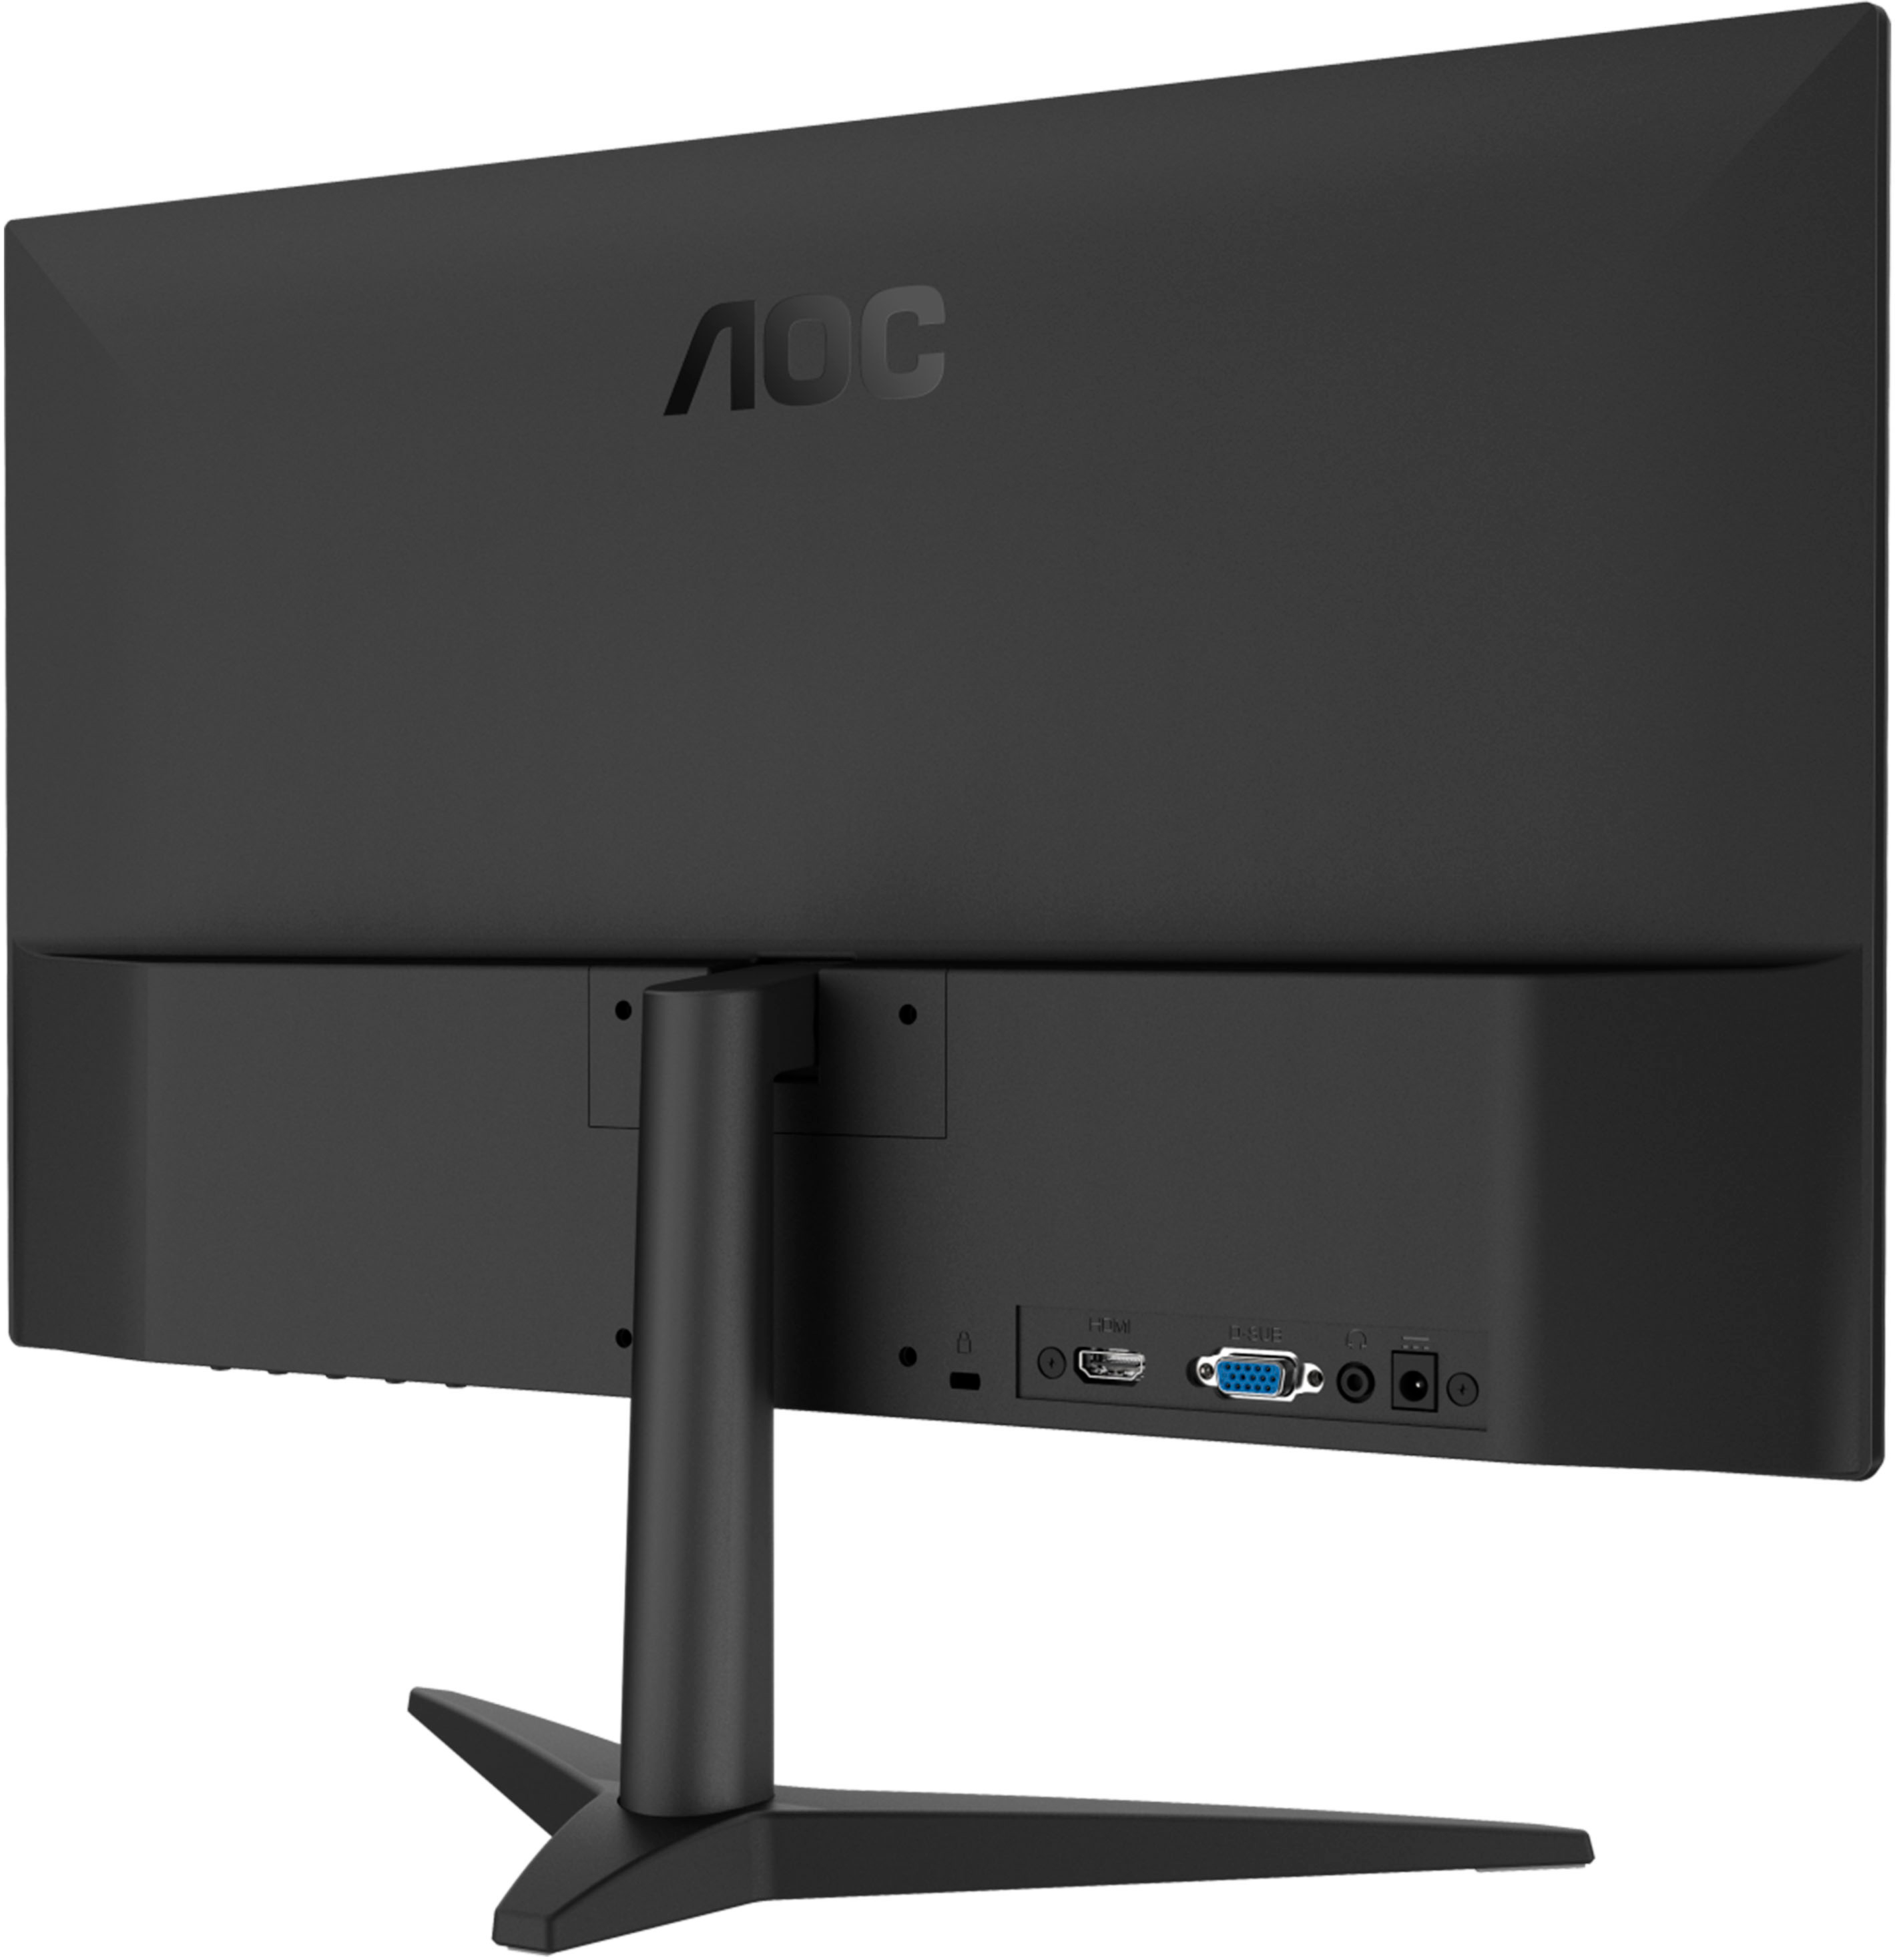 Back View: AOC - 23.8 LCD FHD Monitor with HDR (DisplayPort VGA, HDMI) - Black and Red